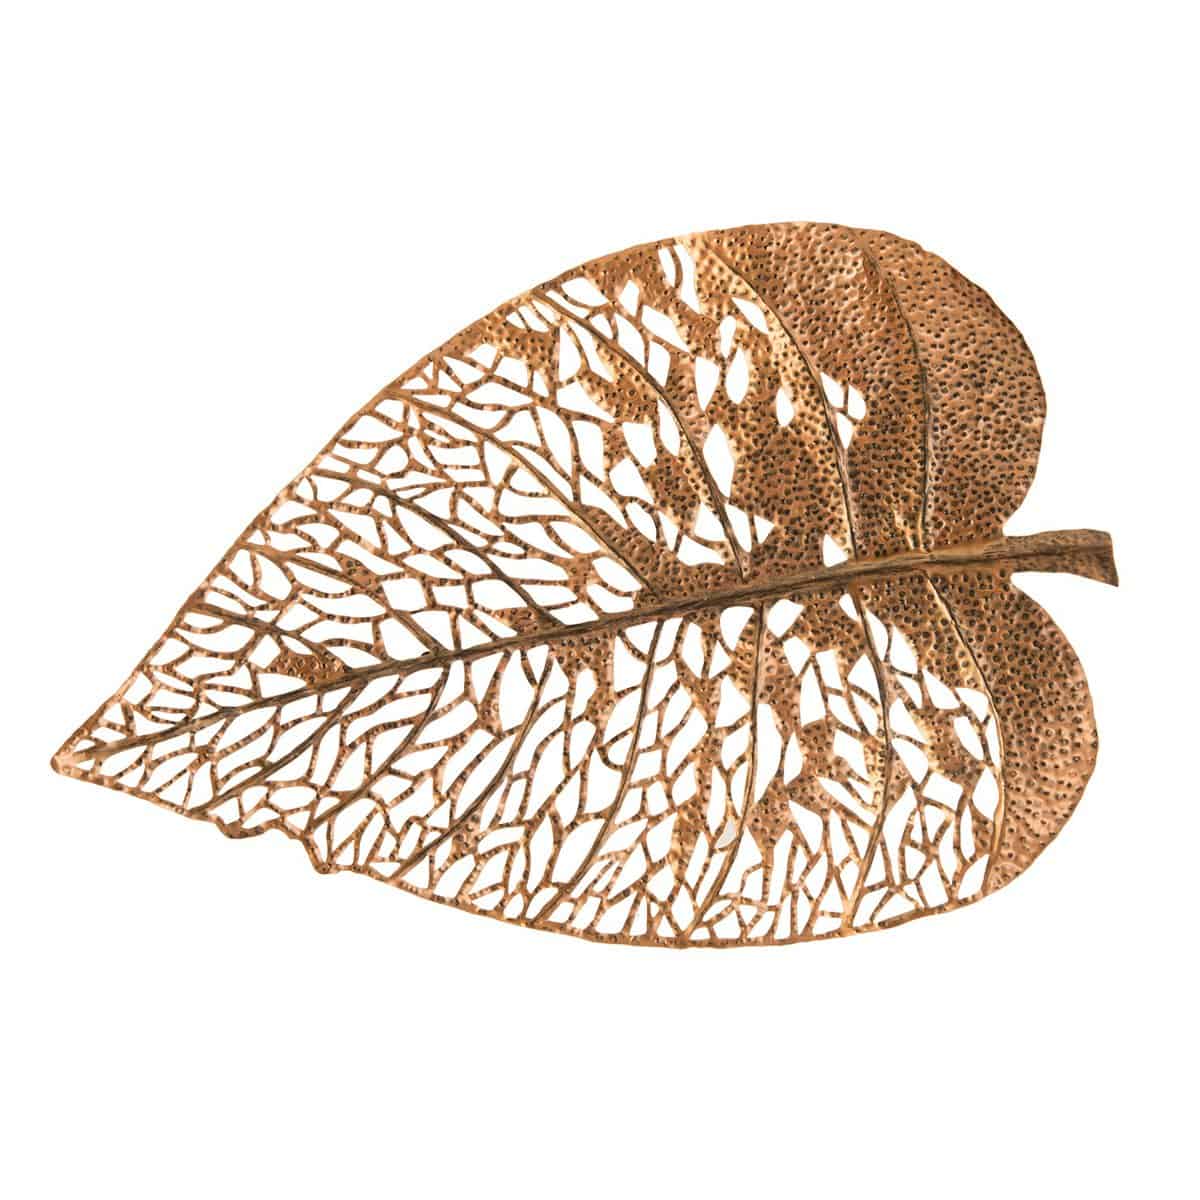 Metal Wall Art leaves Set of 4 copper/bronze plated by HGMW 